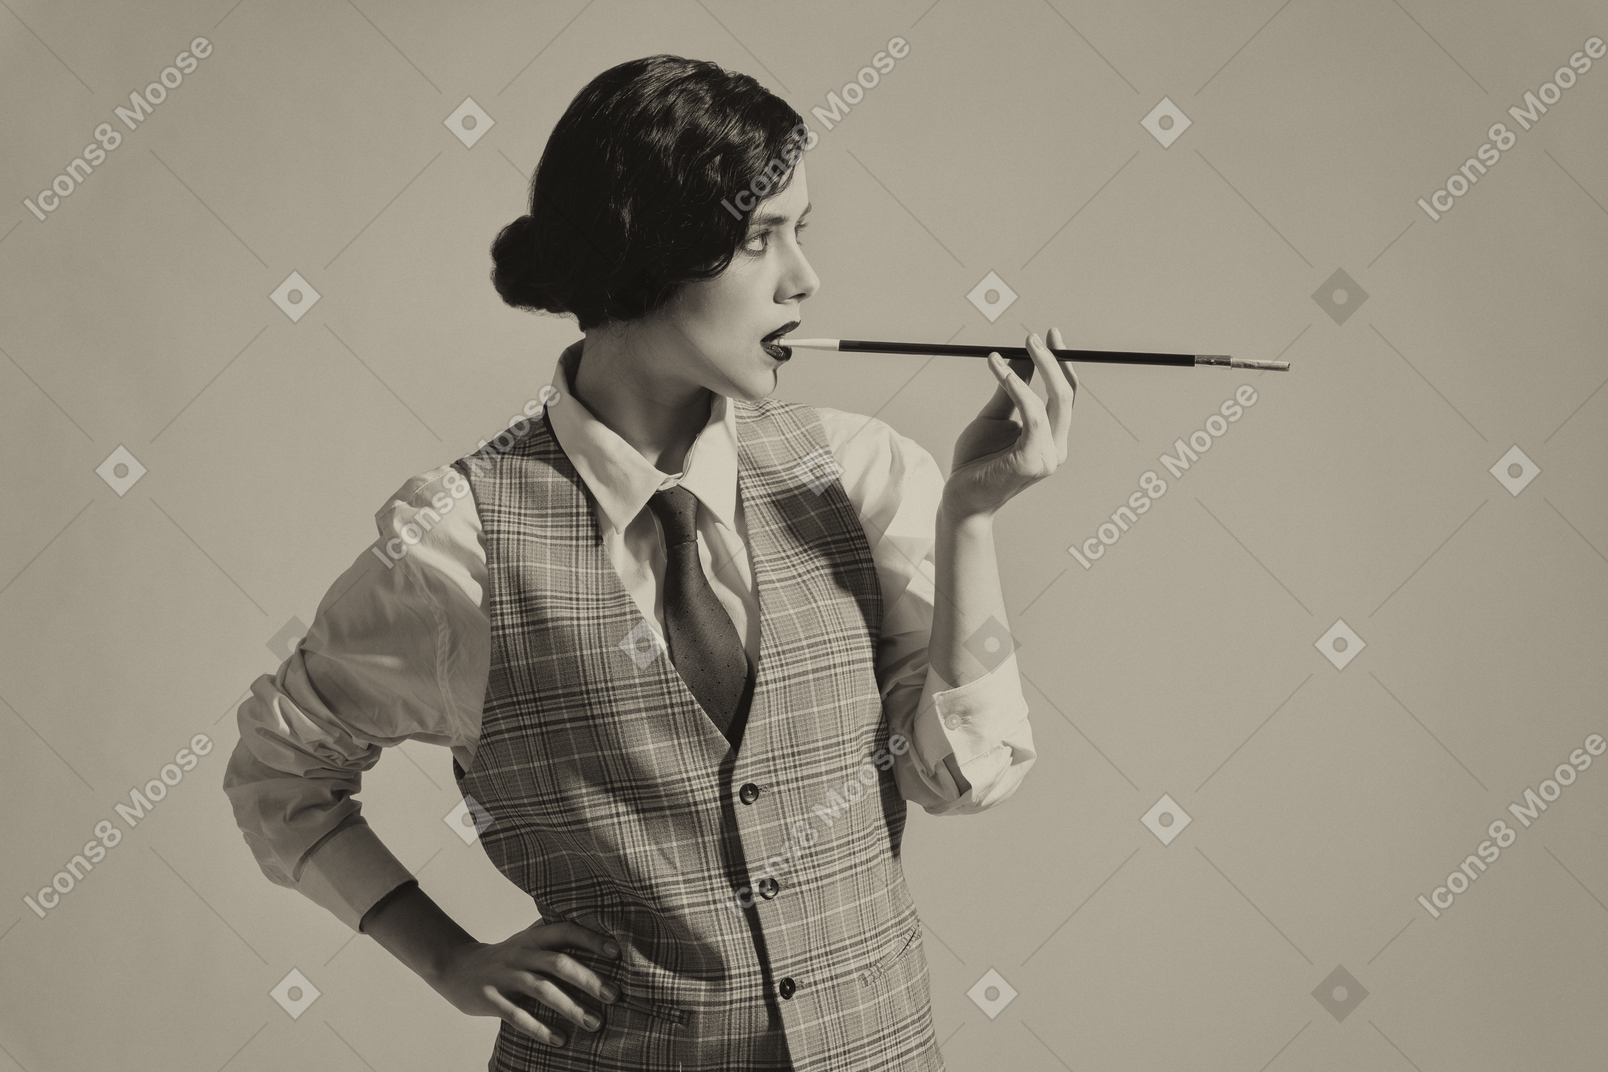 Portrait of an elegant woman with a cigarette holder